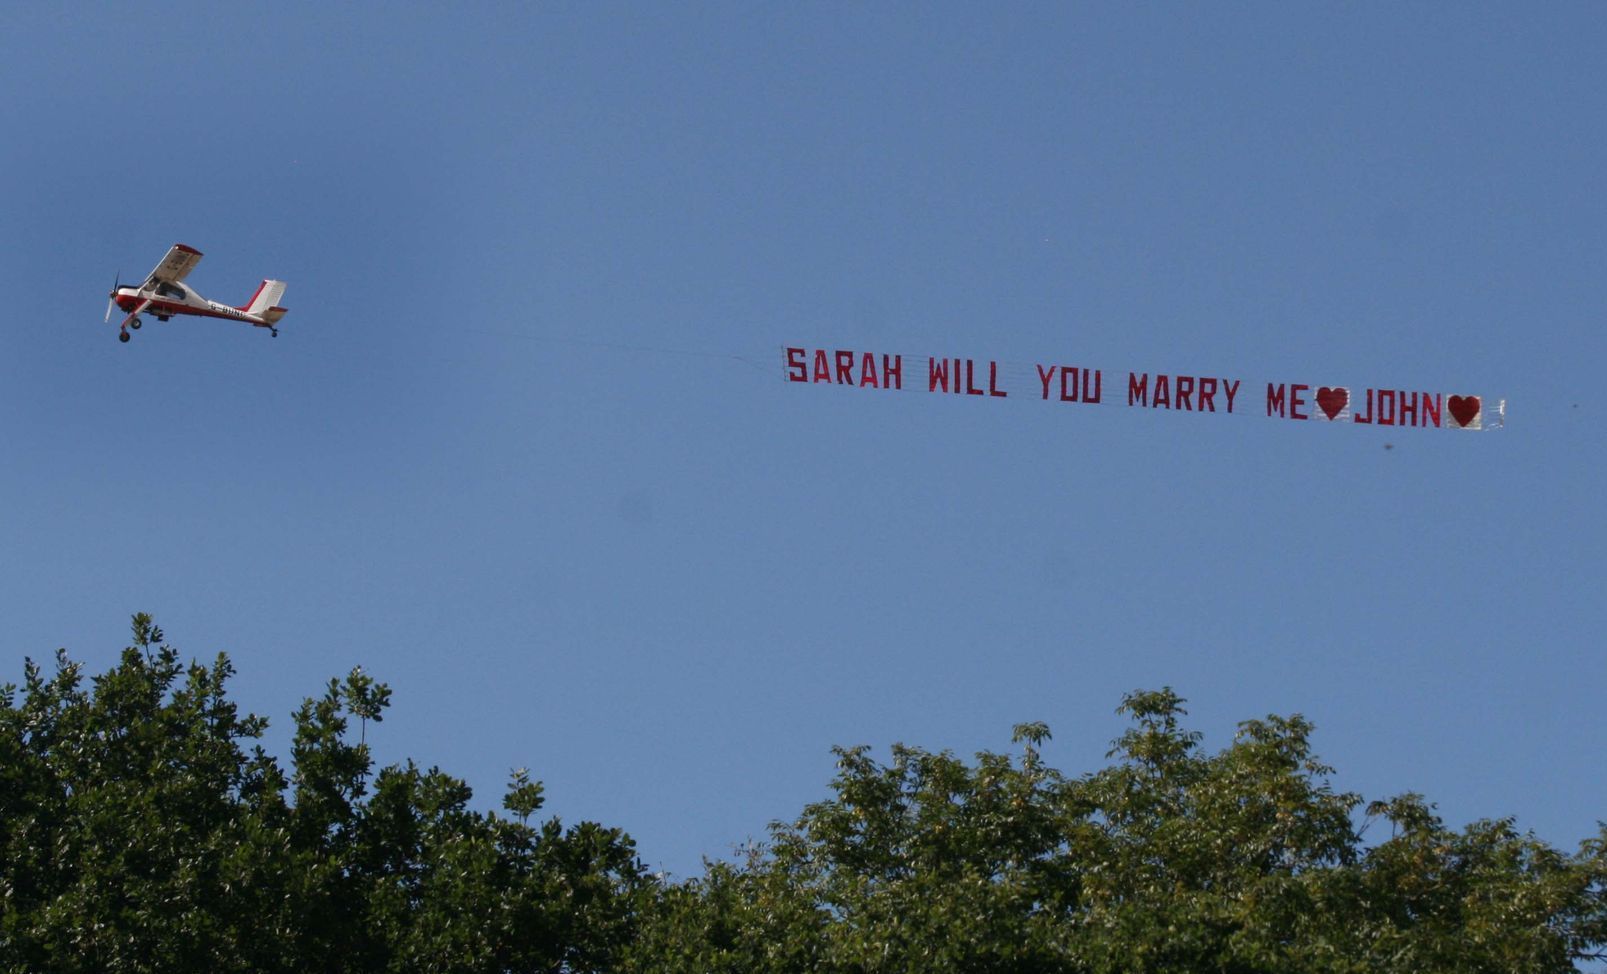 Marrage proposal banner in the sky